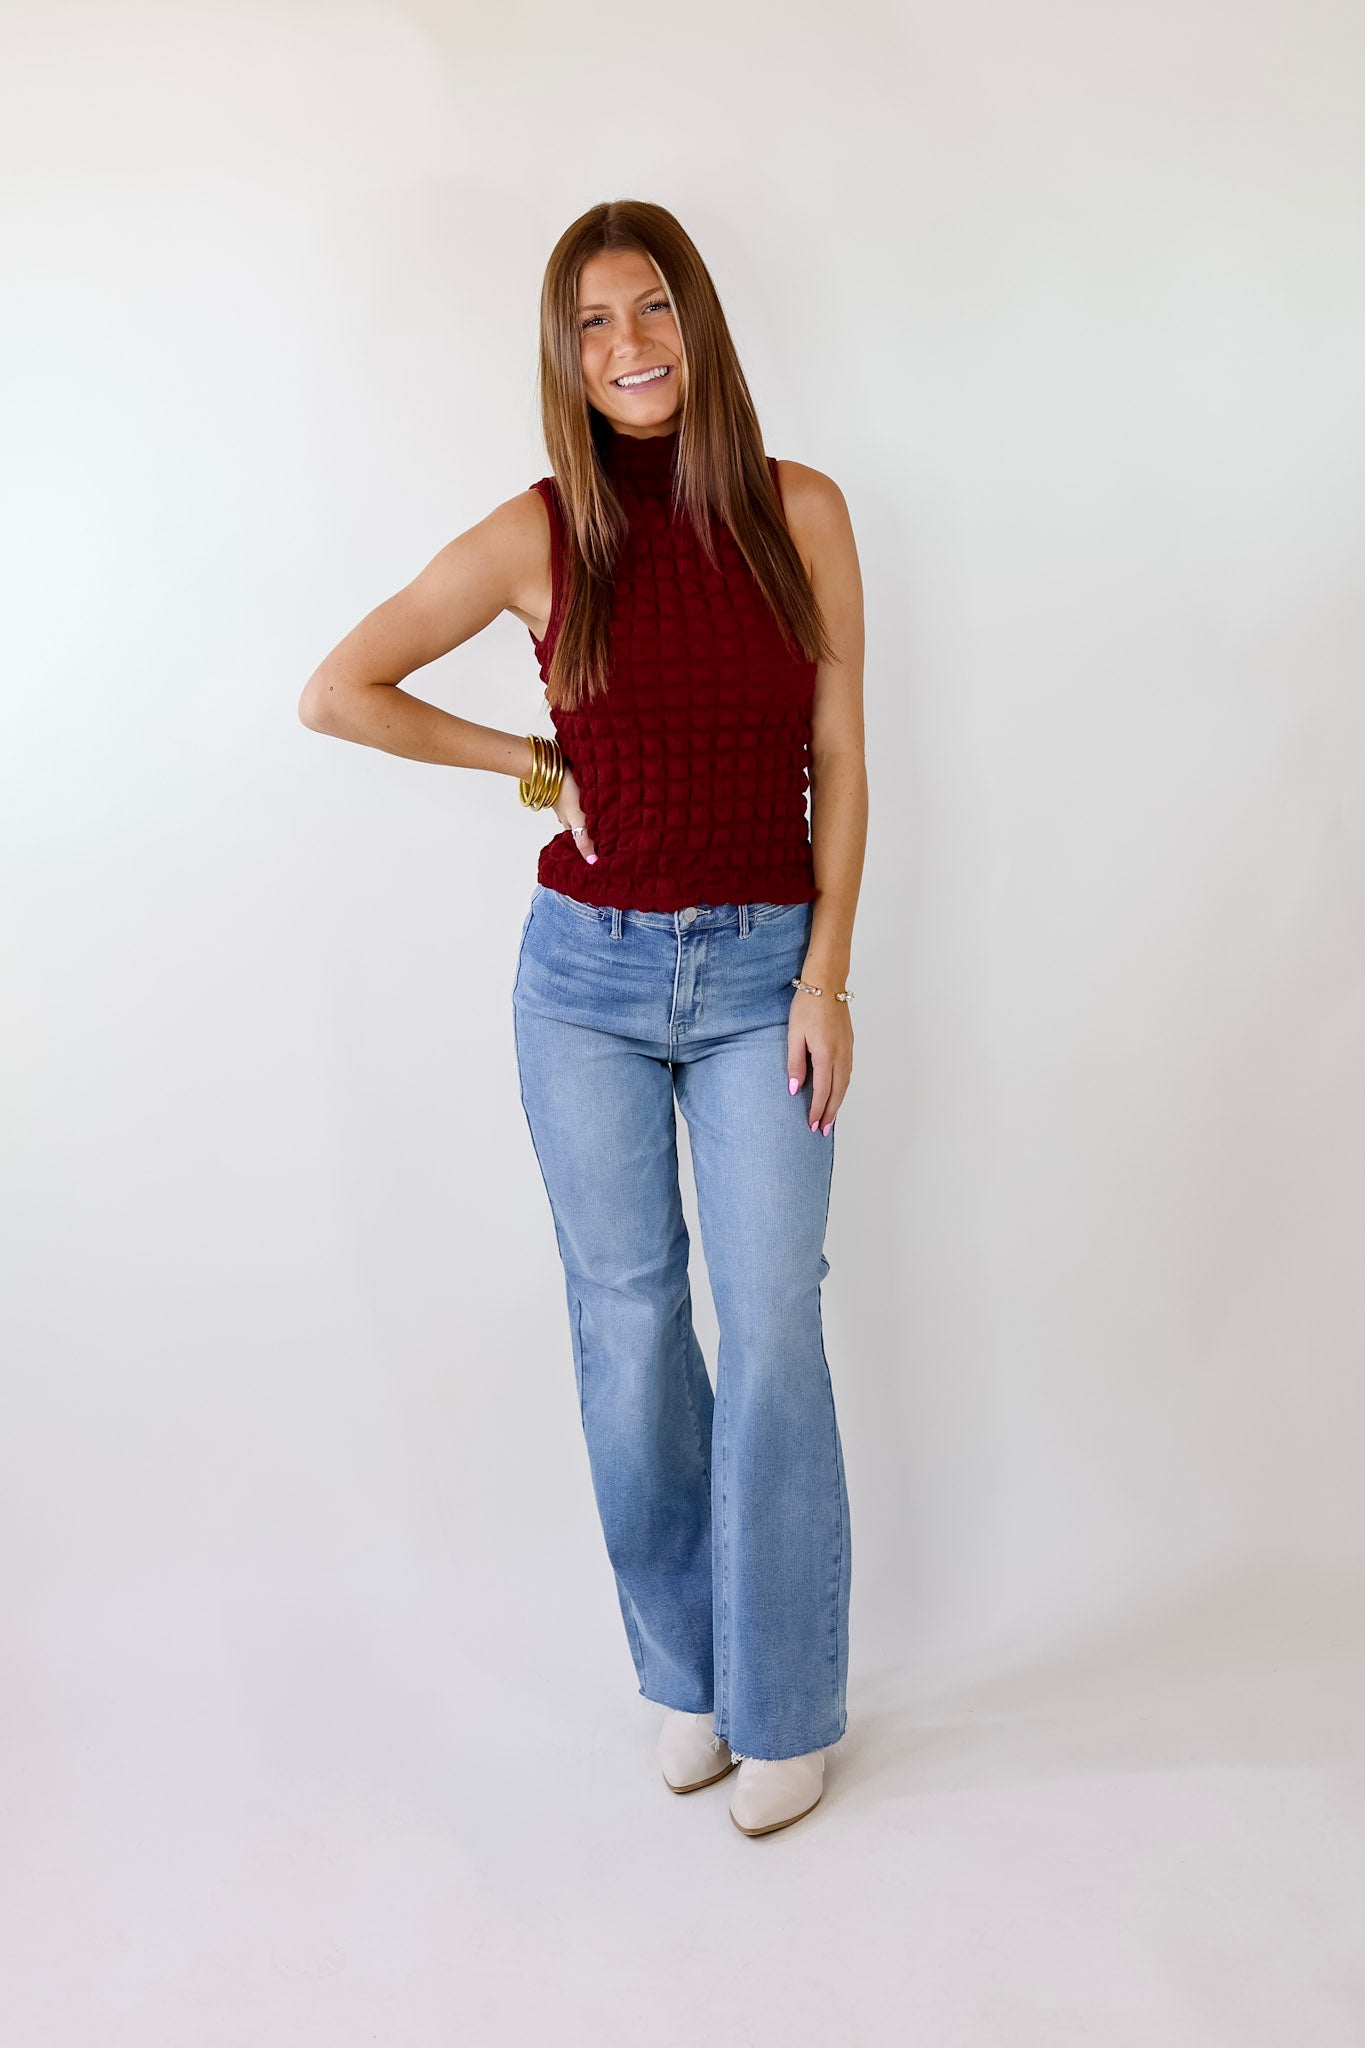 Daring Stares Mock Neck Bubble Tank Top in Maroon - Giddy Up Glamour Boutique